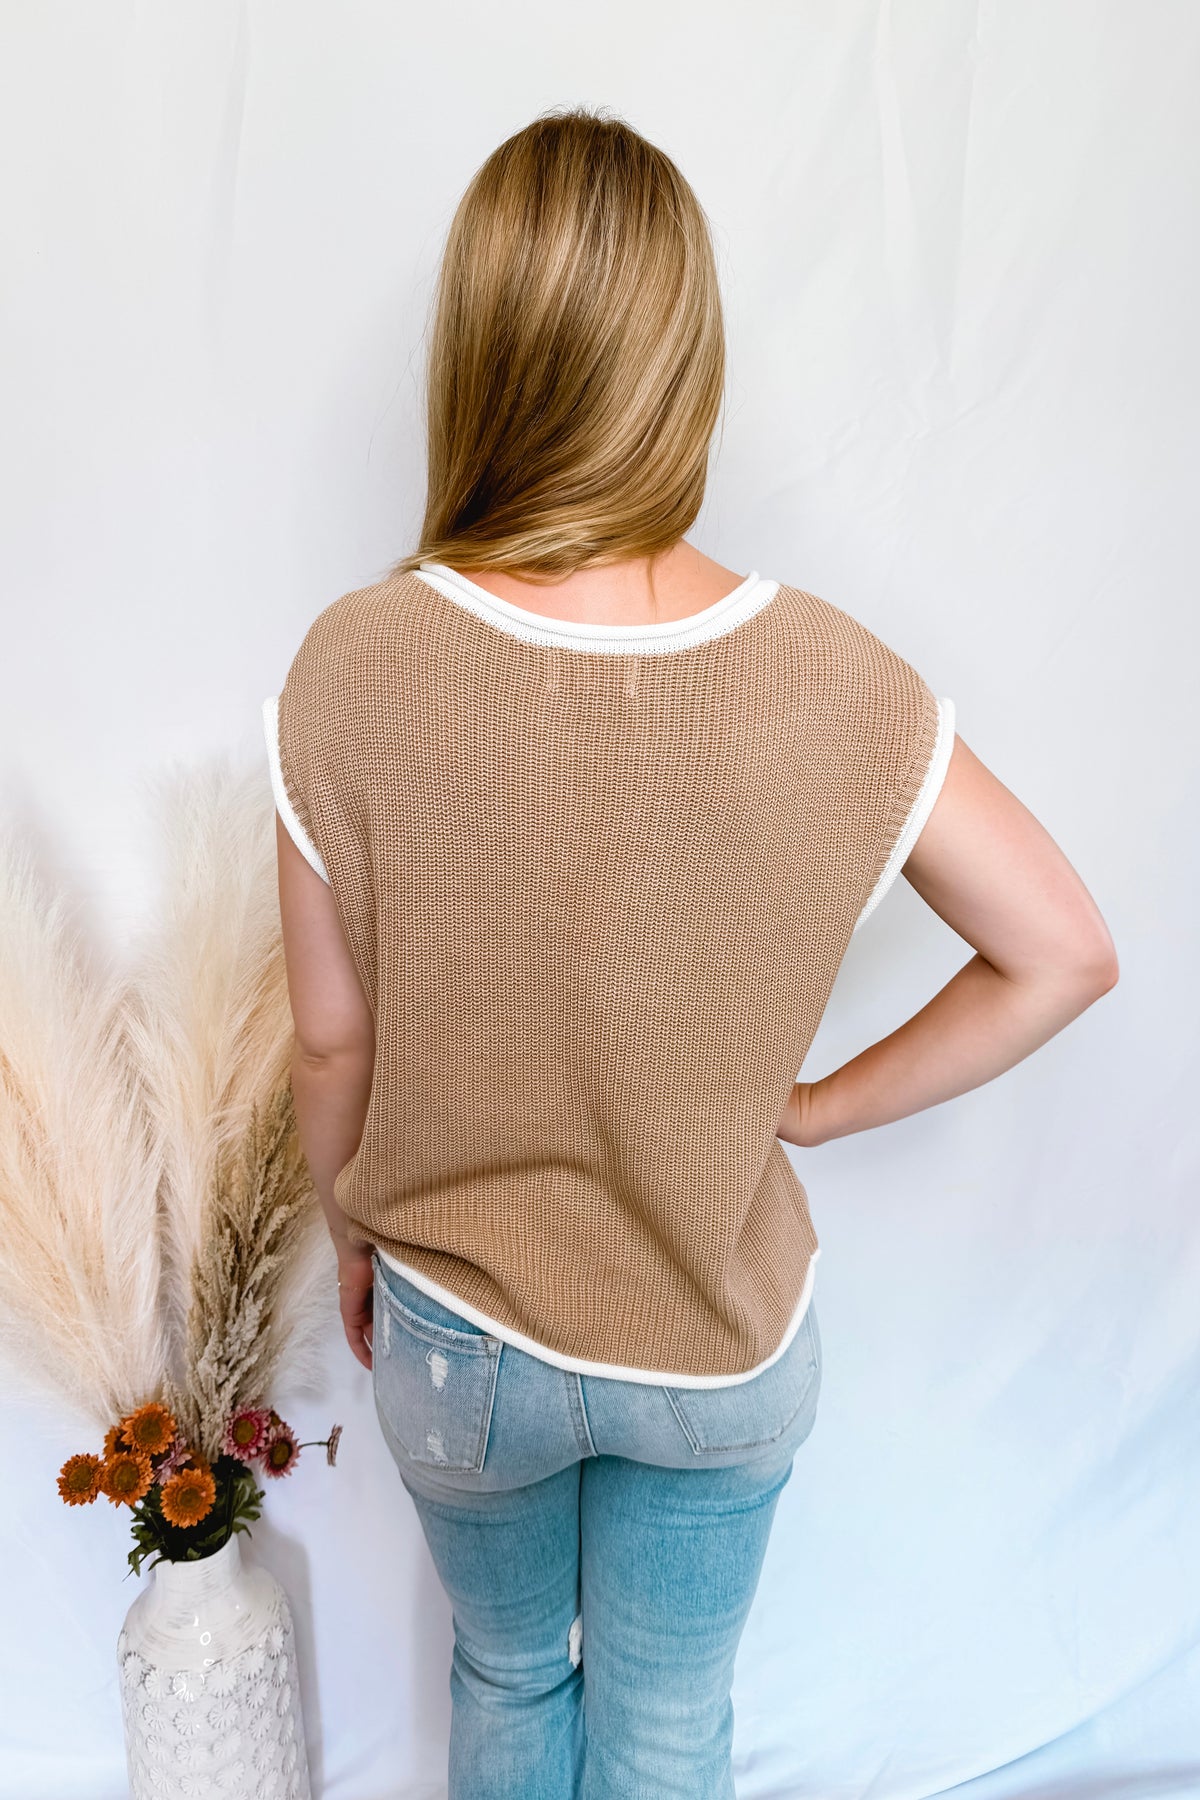 Soft Smile Knit Tank - Taupe/Ivory